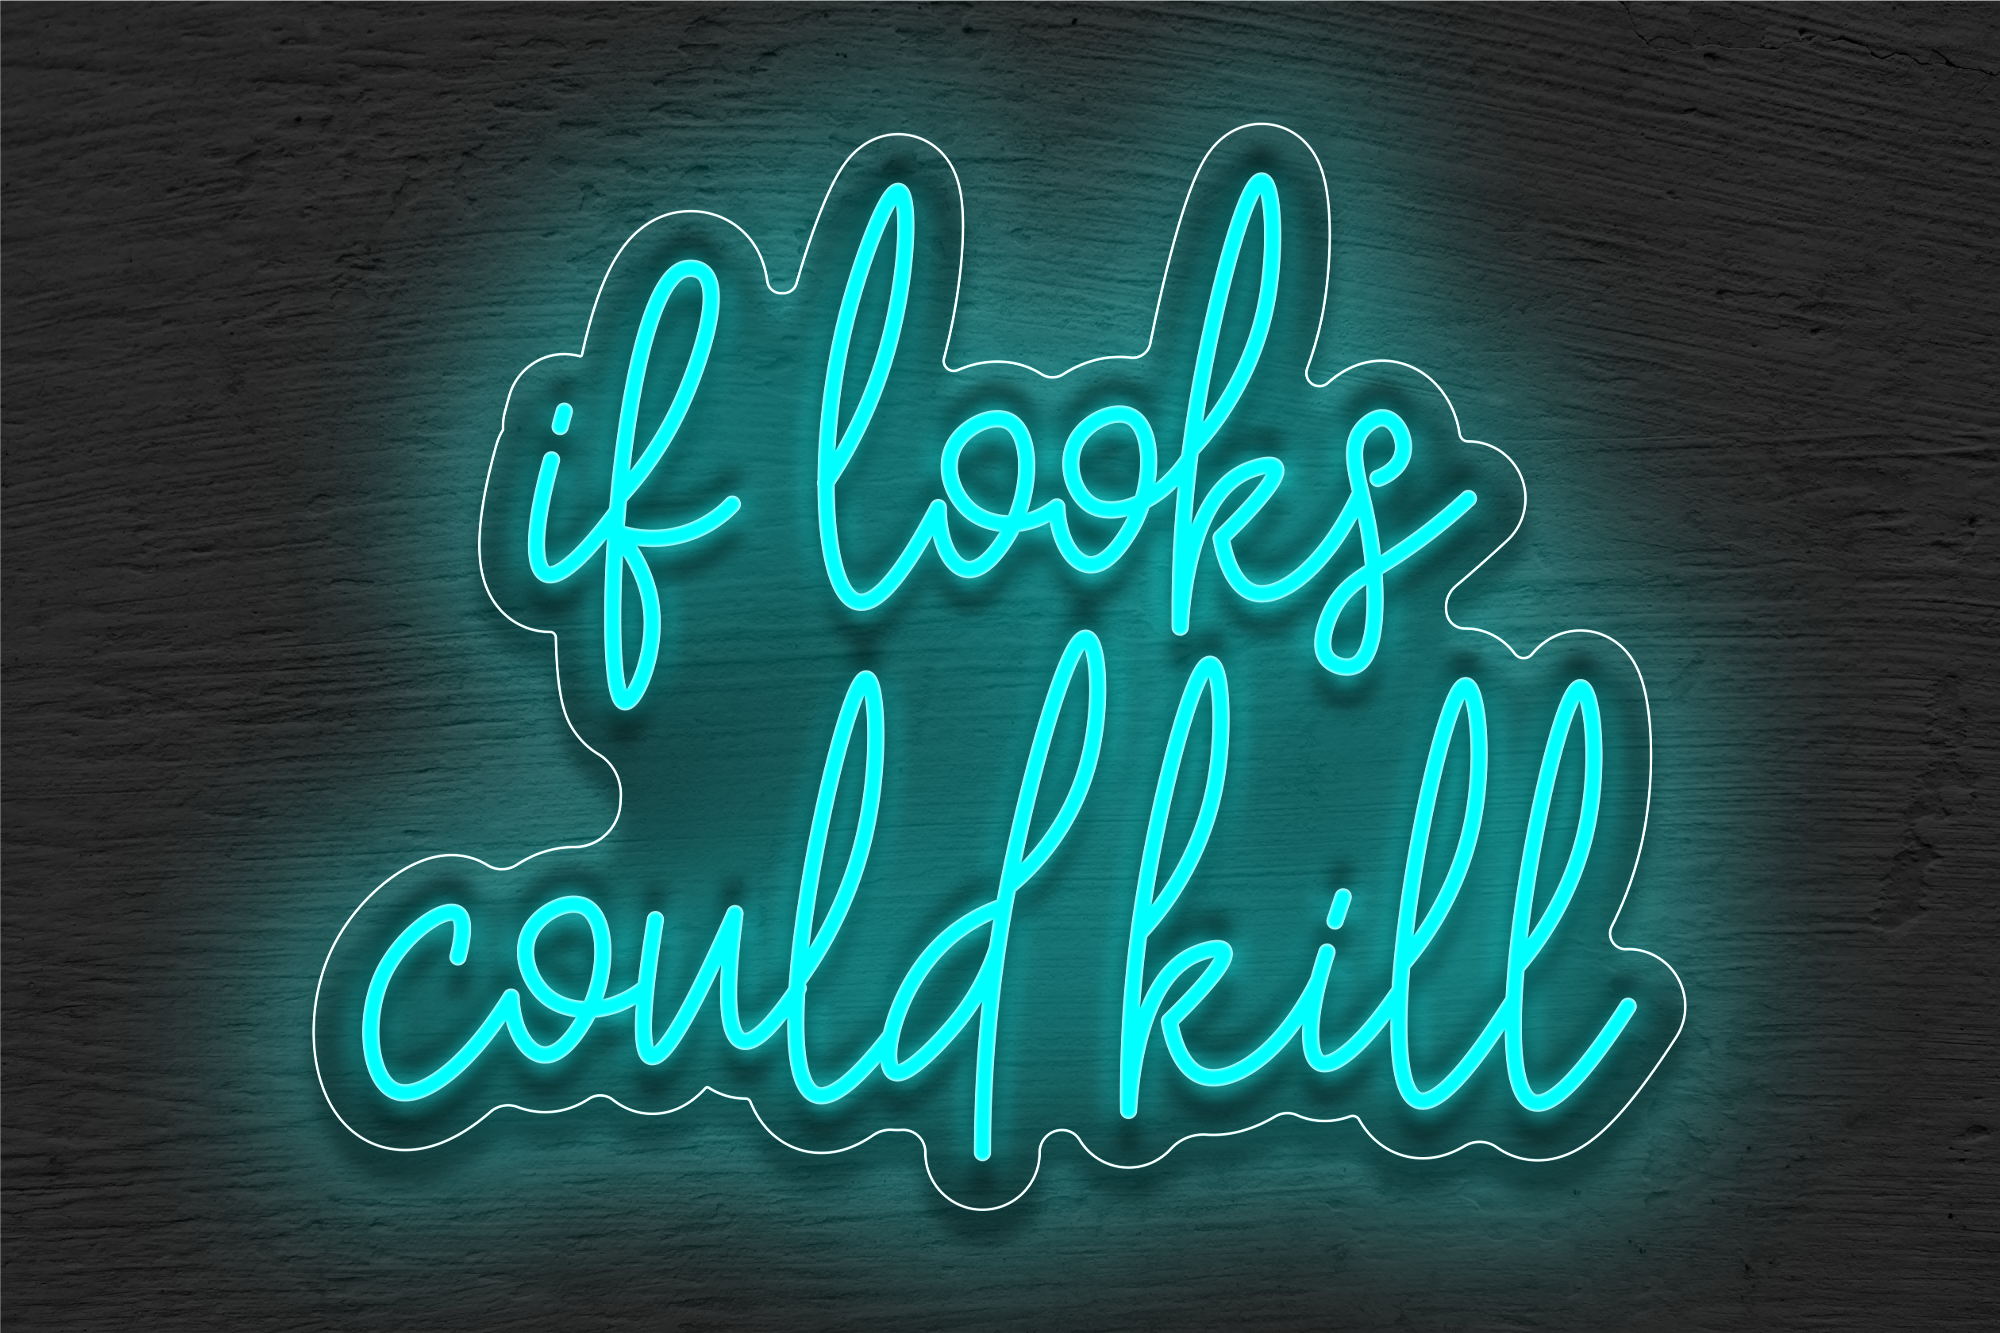 "If looks could kill" LED Neon Sign